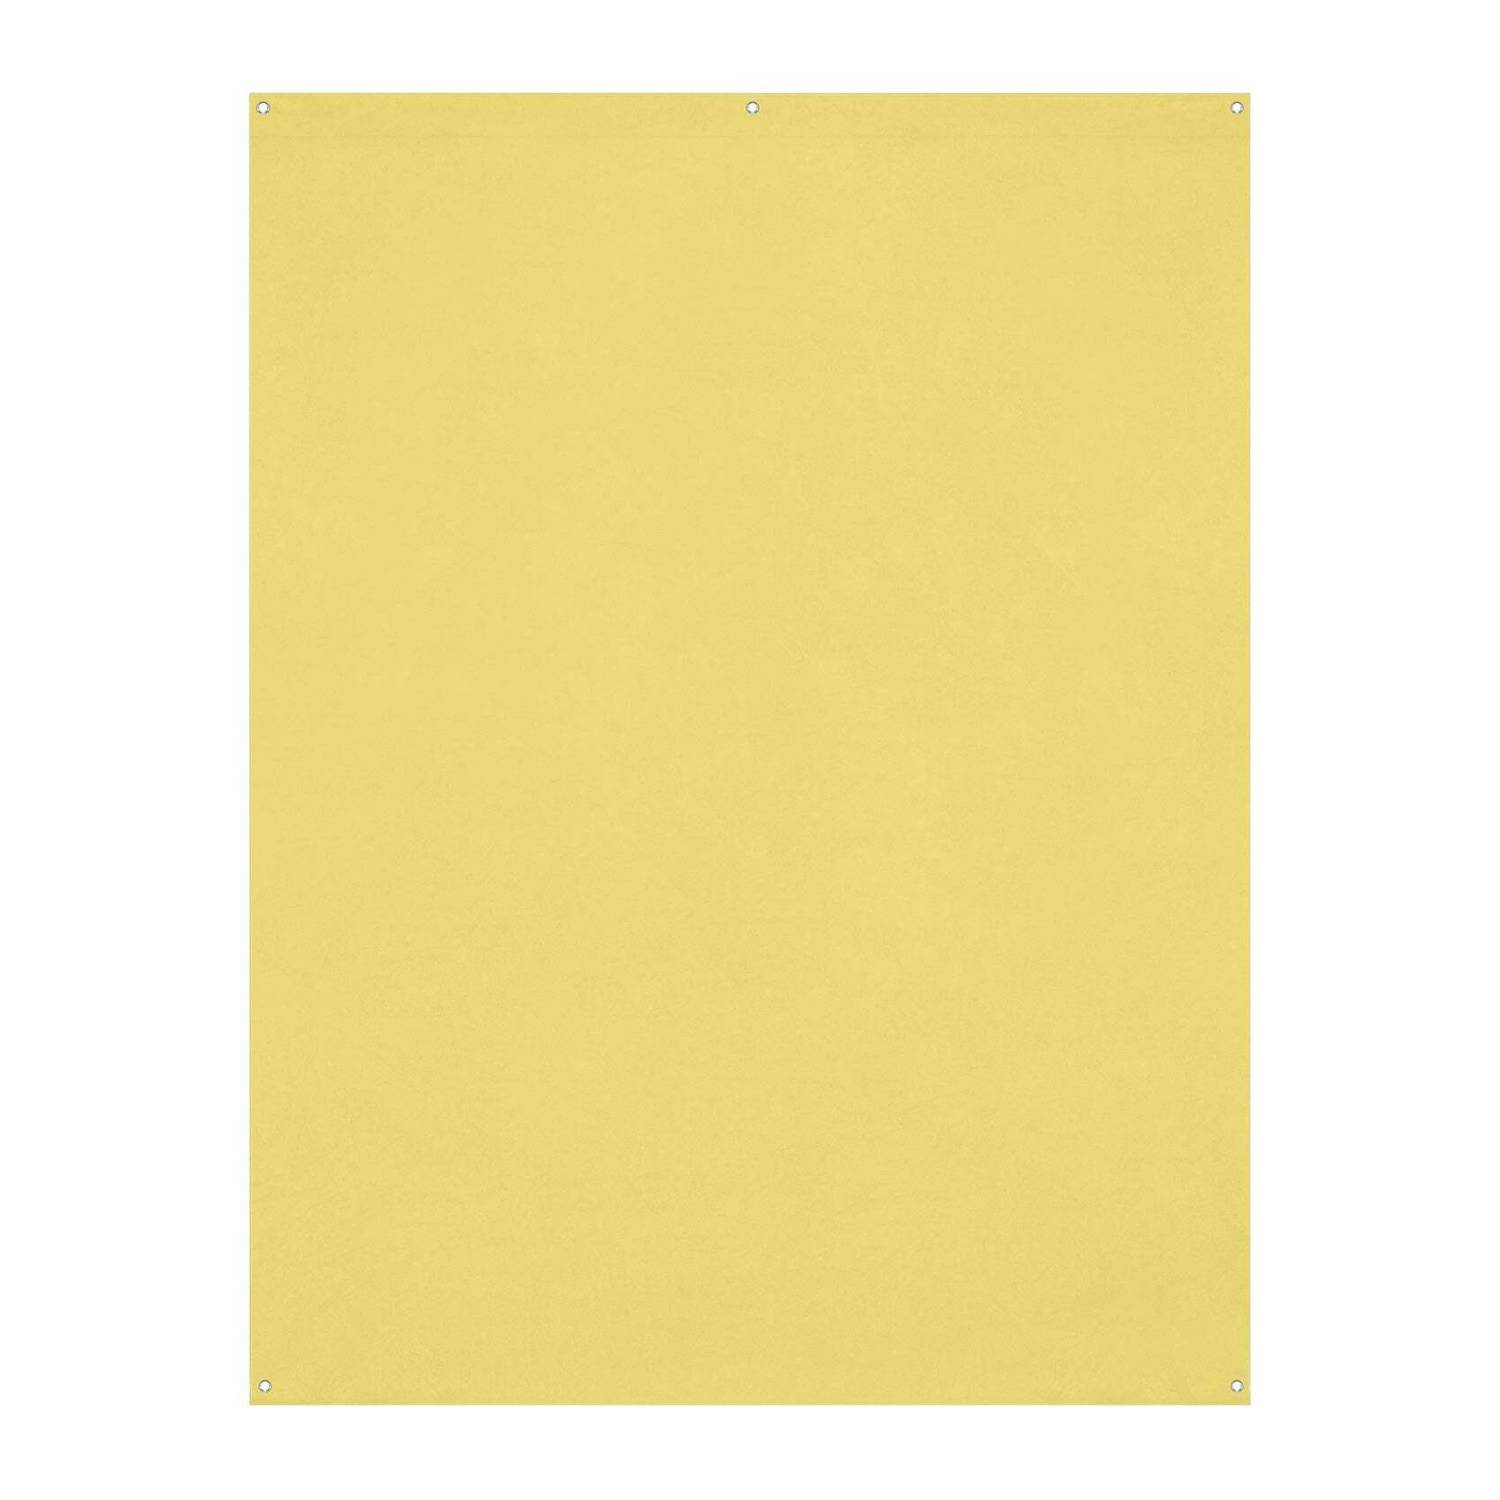 Westcott X-Drop Wrinkle-Resistant Backdrop, Best for Video Conferencing (Canary Yellow, 5 x 7 Feet)